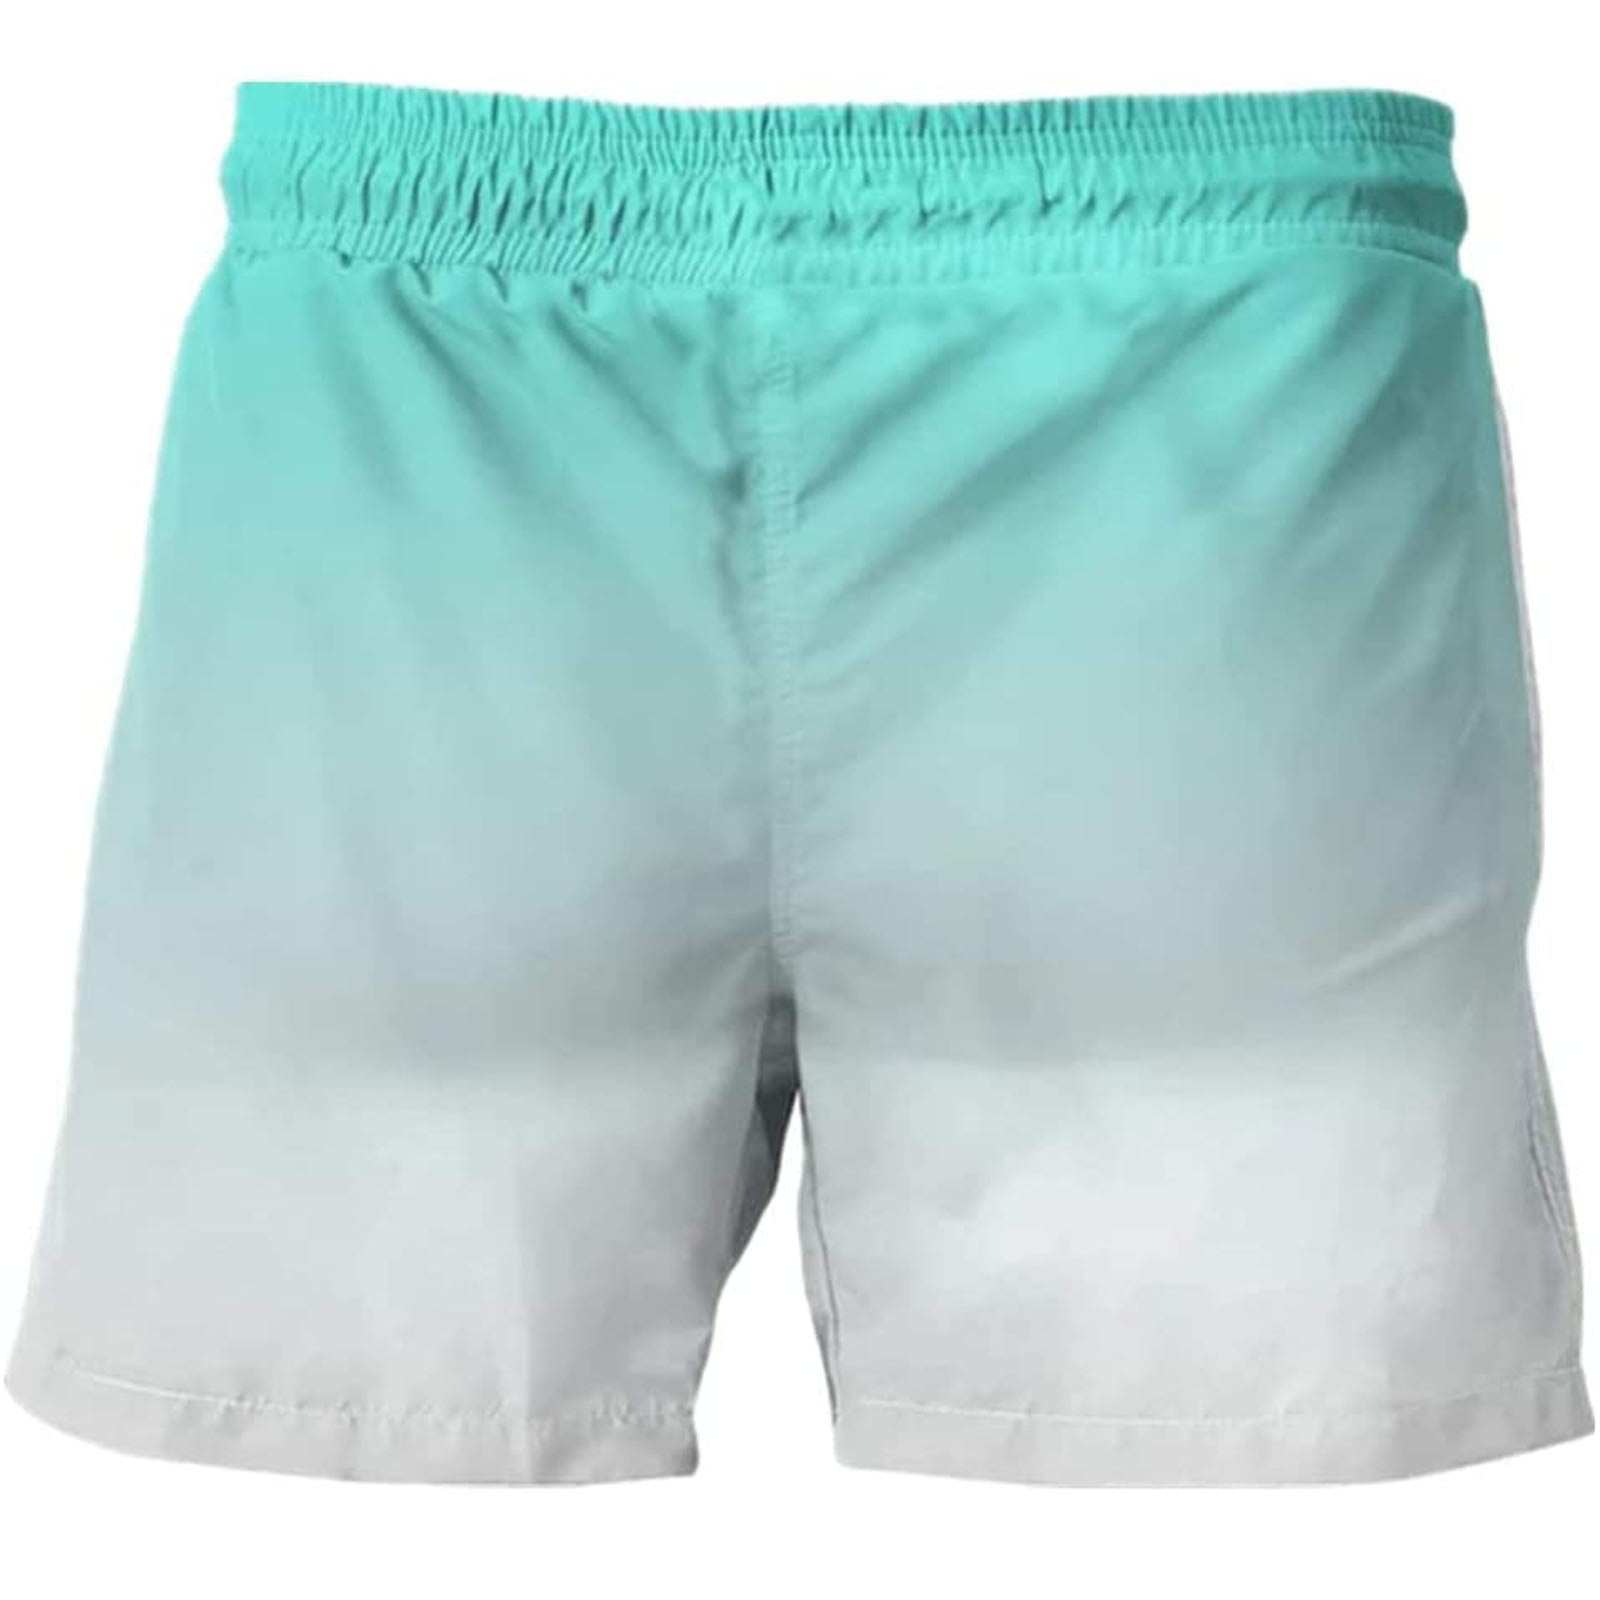 Boys Scouts Otter Pattern Comfortable Quick Dry Swim Trunks Elastic Drawstring Surfing Shorts with Pocket